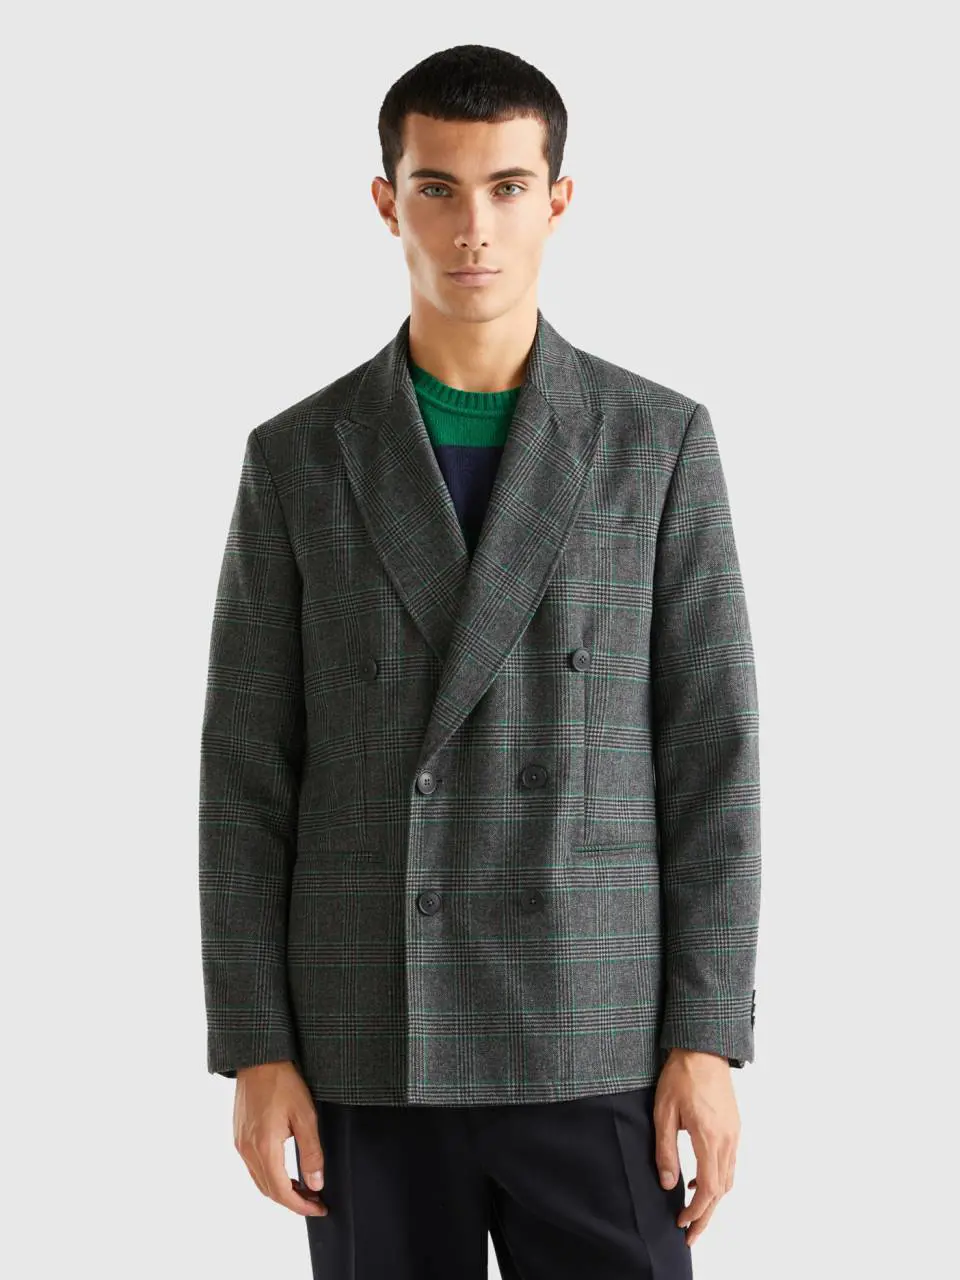 Benetton double-breasted prince of wales jacket. 1